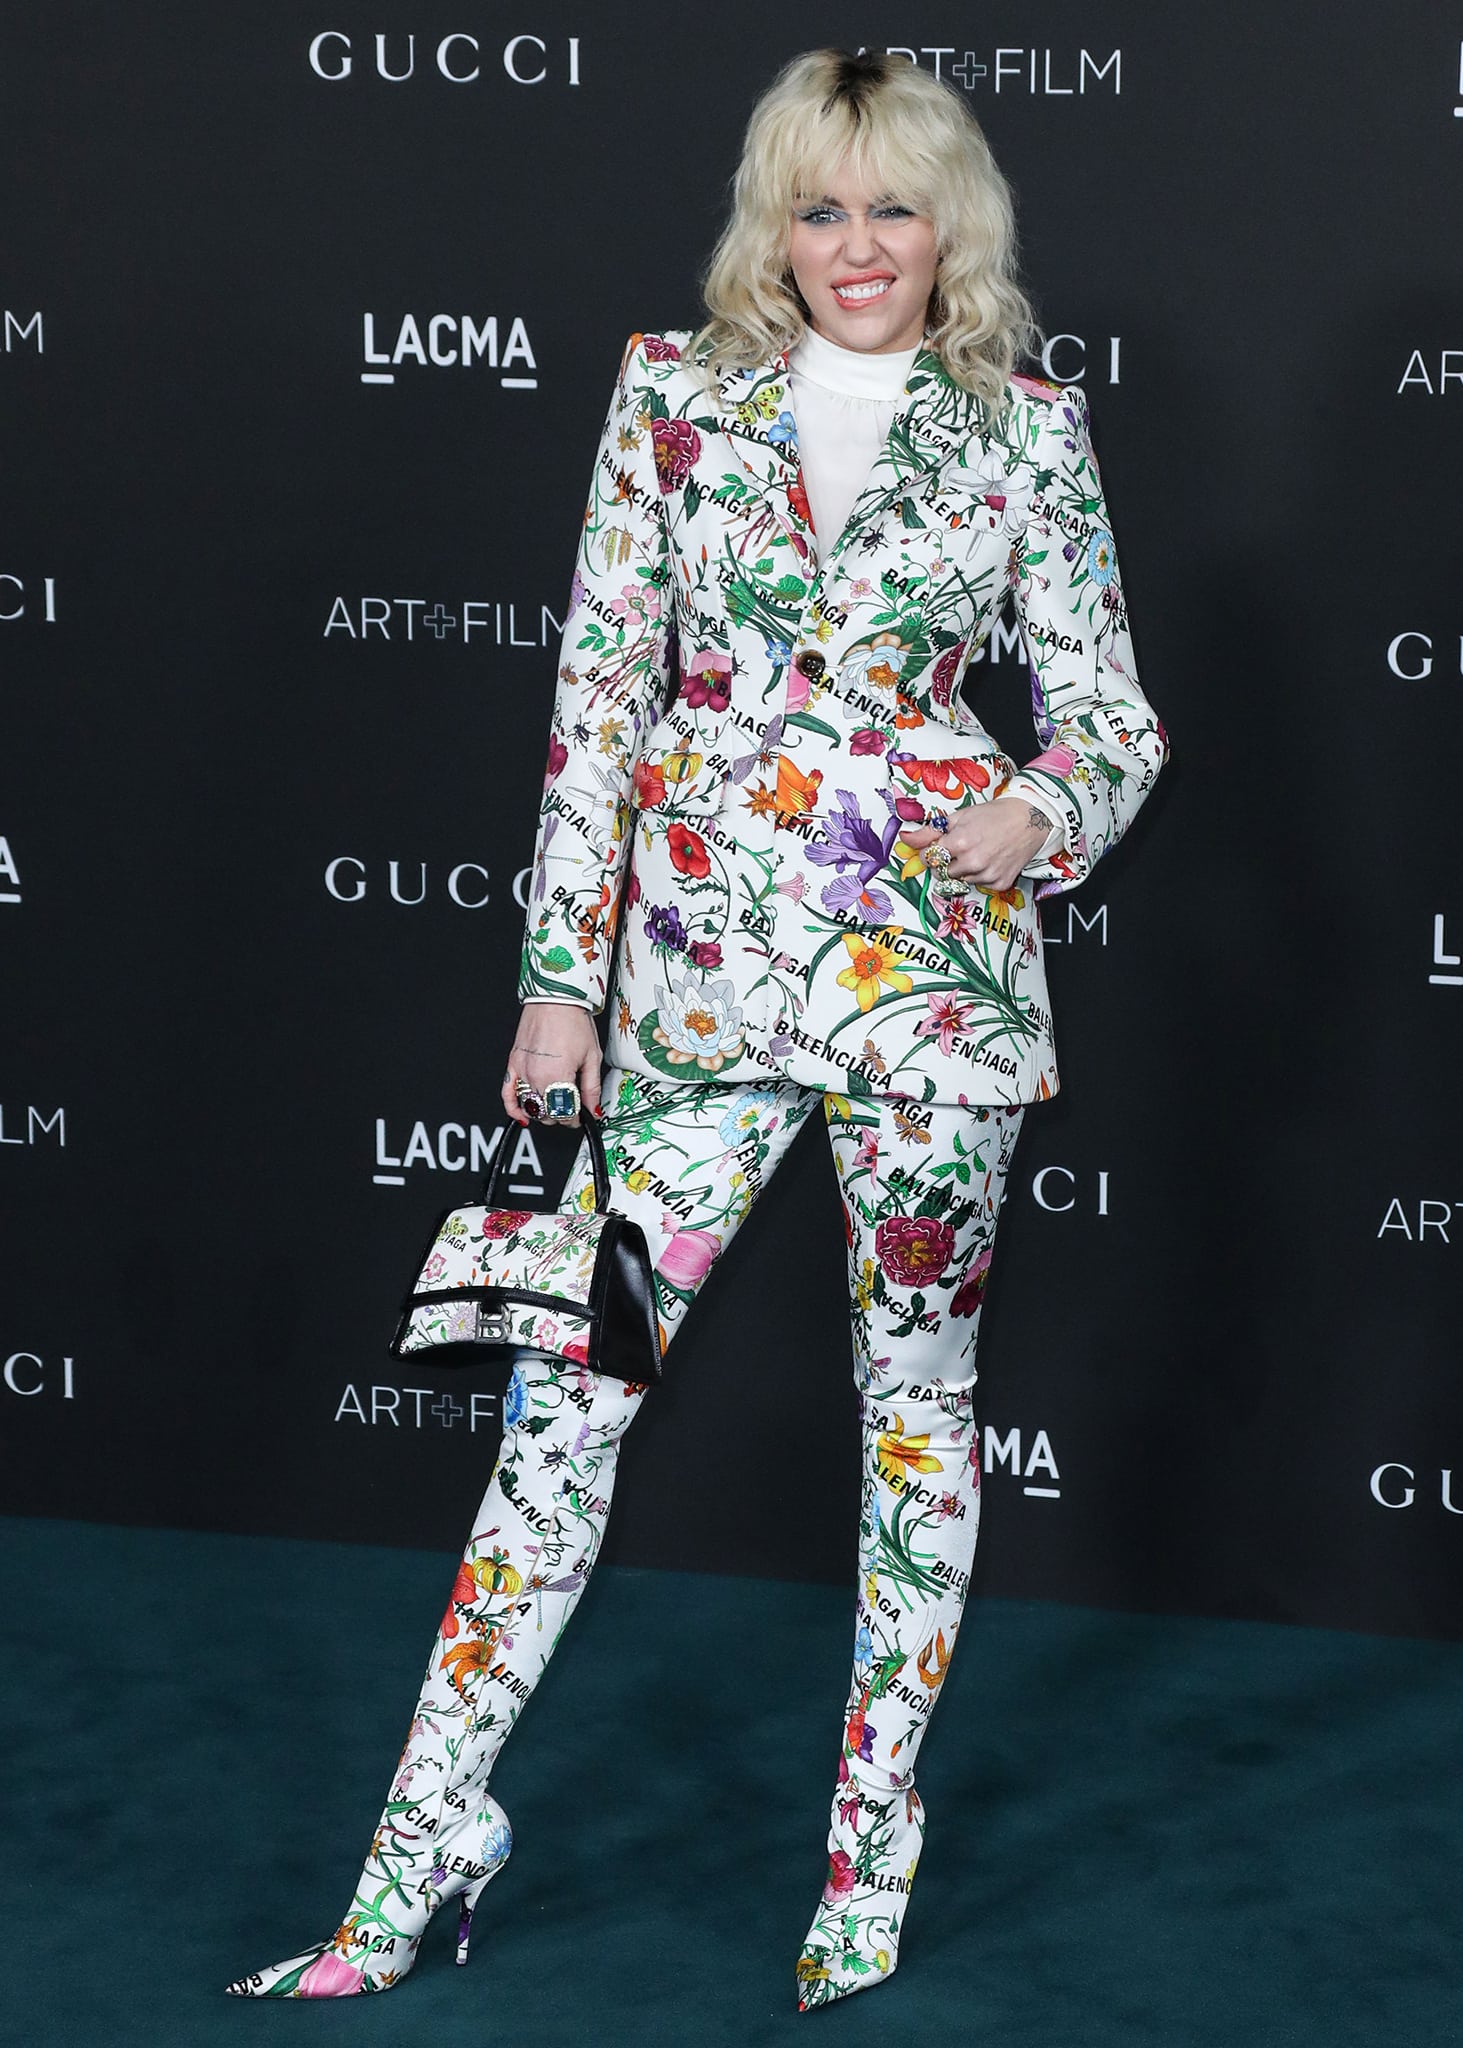 Miley Cyrus turns heads in a Gucci x Balenciaga hybrid look from Gucci's Fall 2021 collection